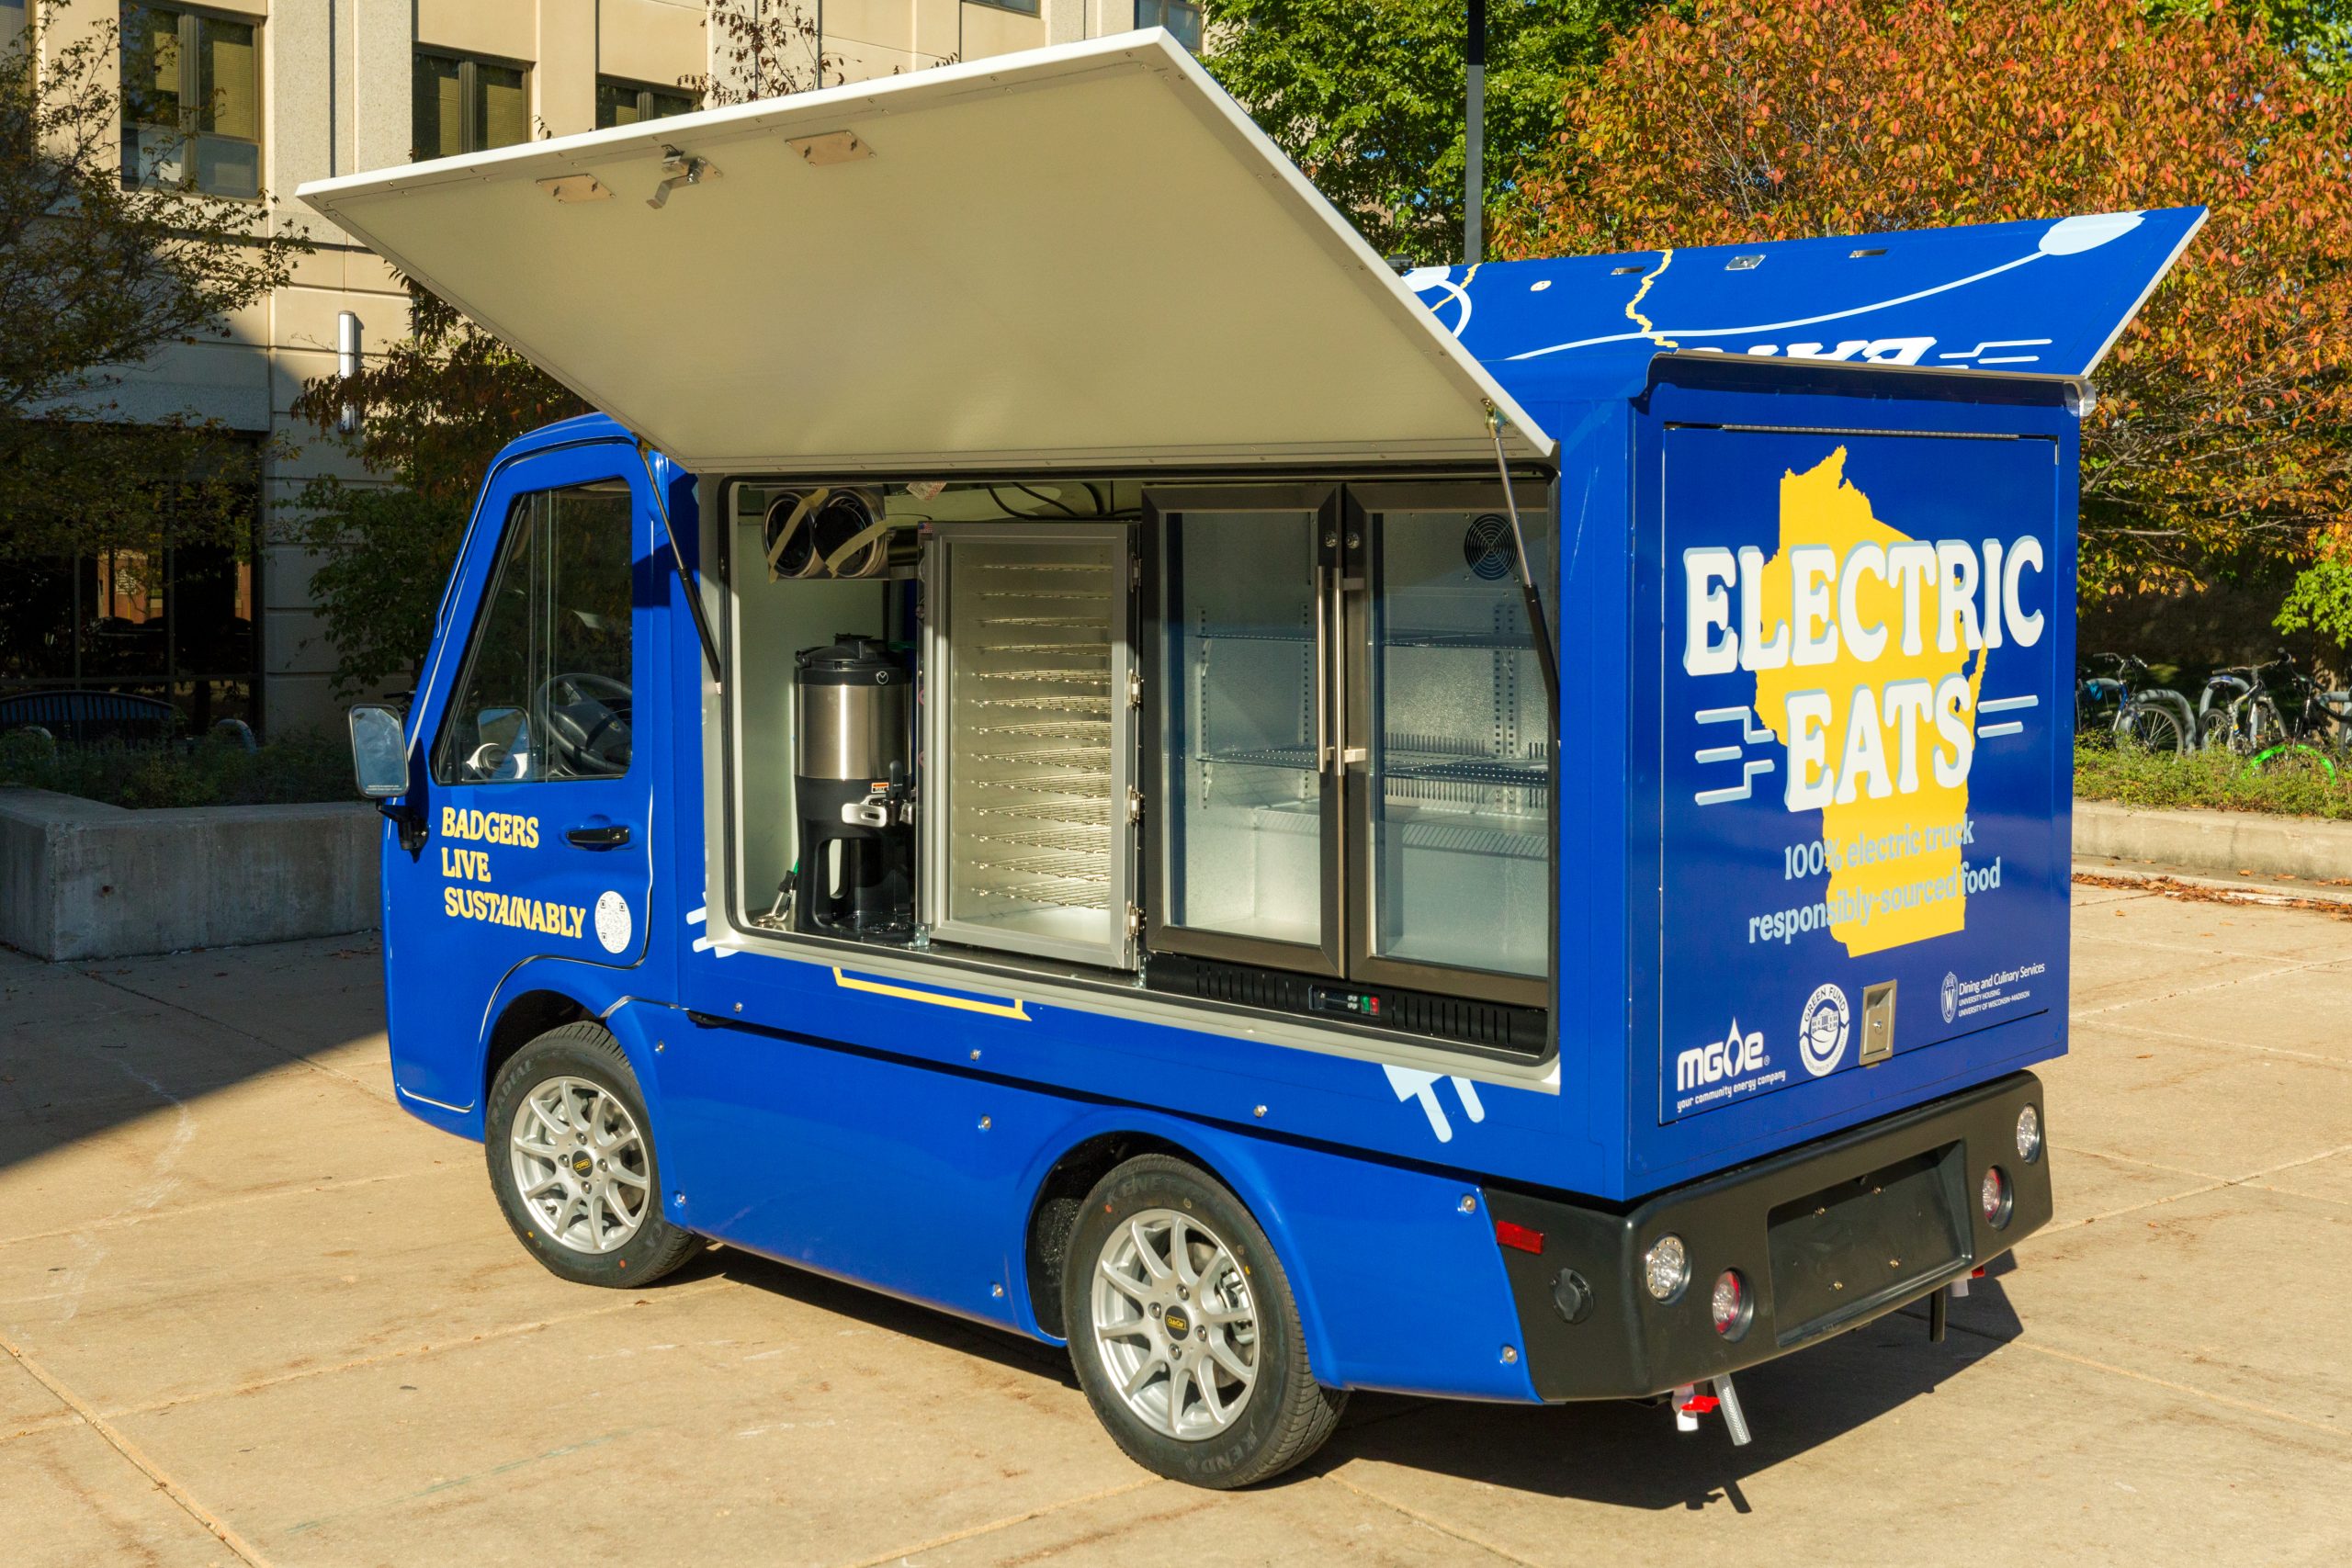 Electric Eats food truck with side panels open showing internal coolers